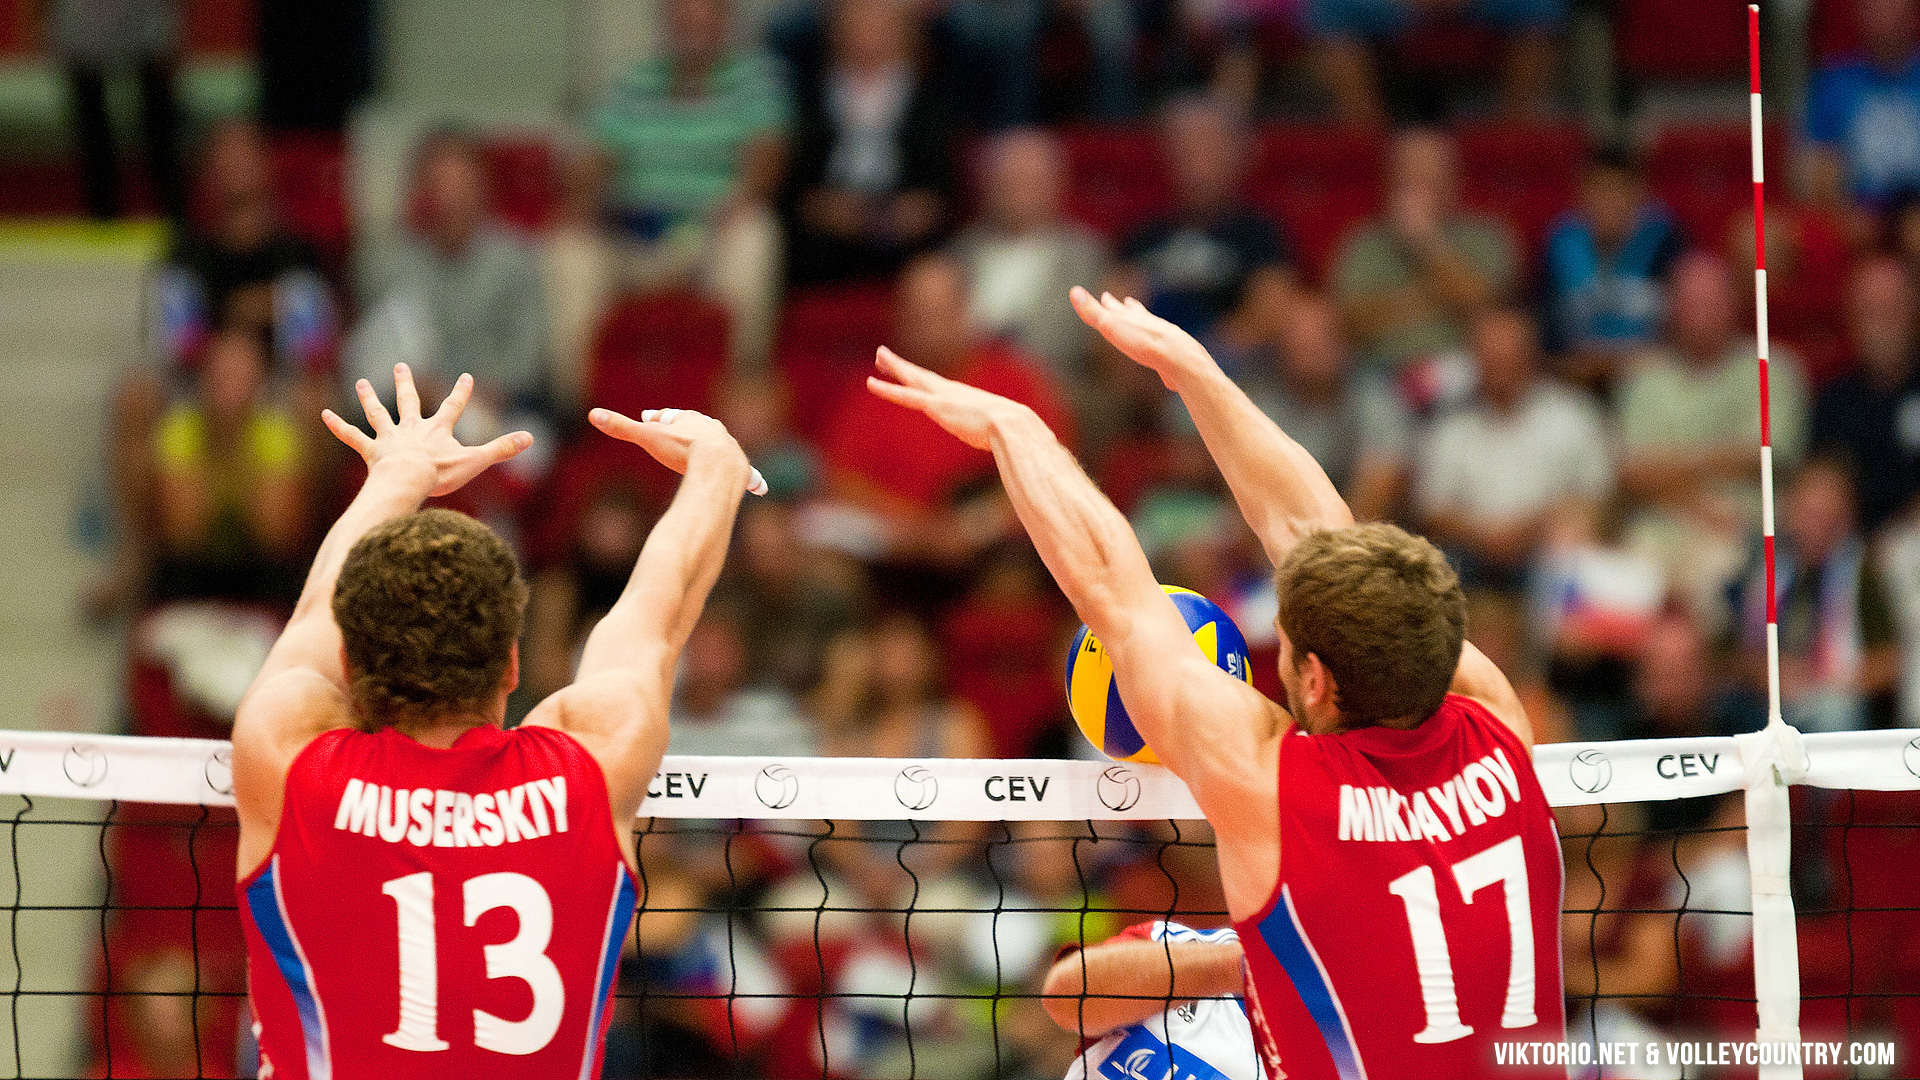 Block, Spike, Bet: Volleyball Betting Tactics for Every Match